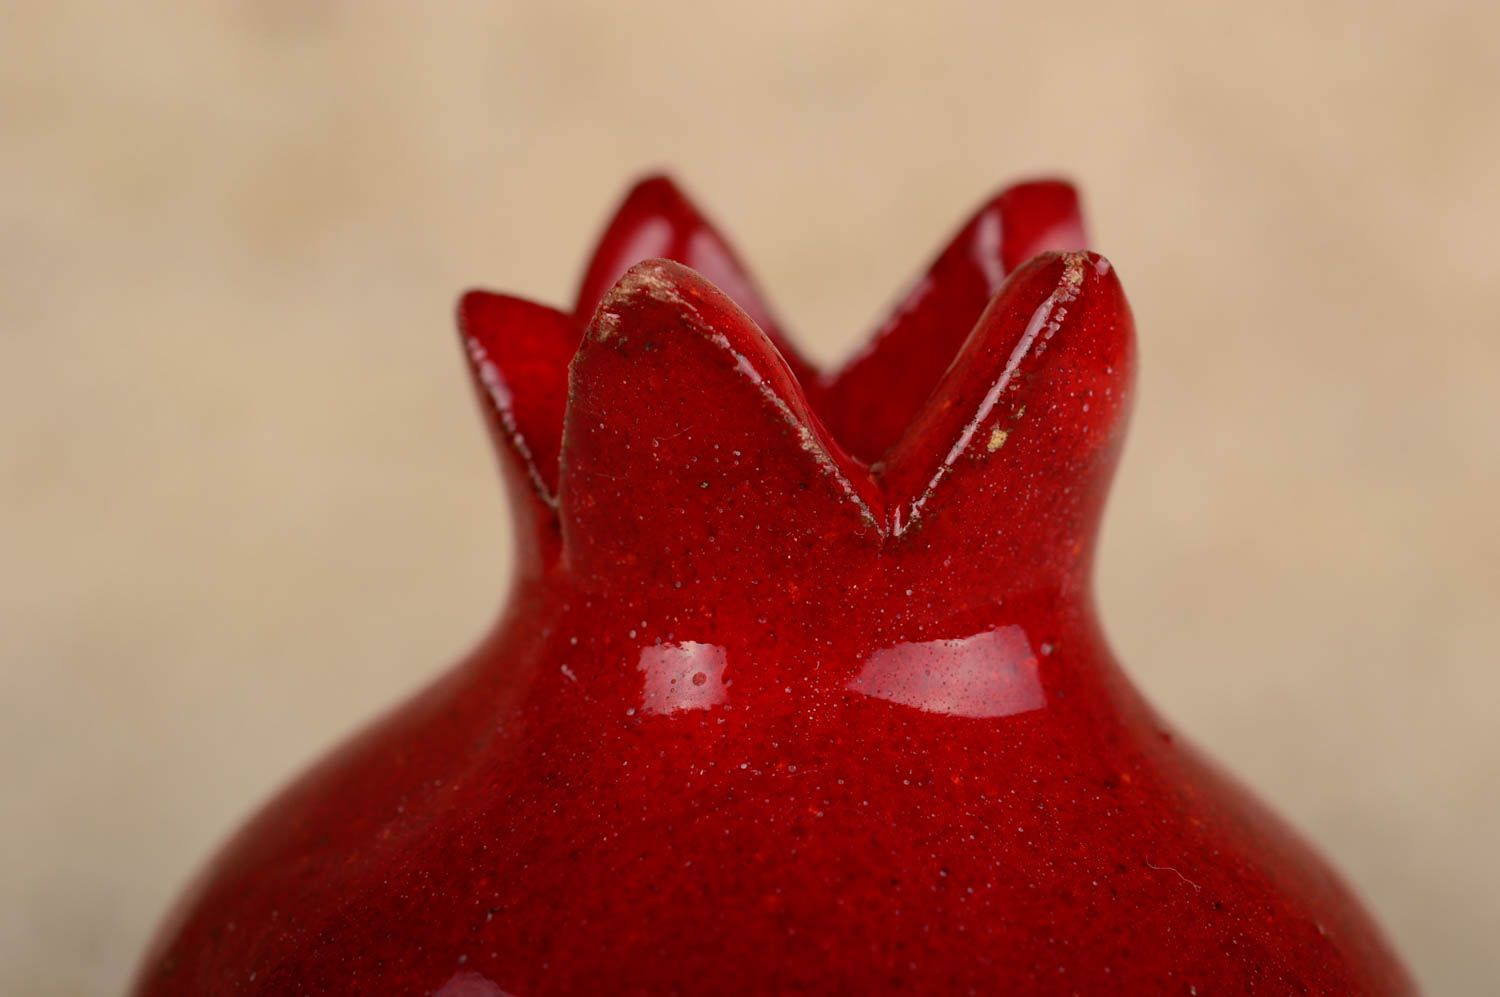 3 inches ceramic vase in the shape of red hot pomegranate 0,12 lb photo 3